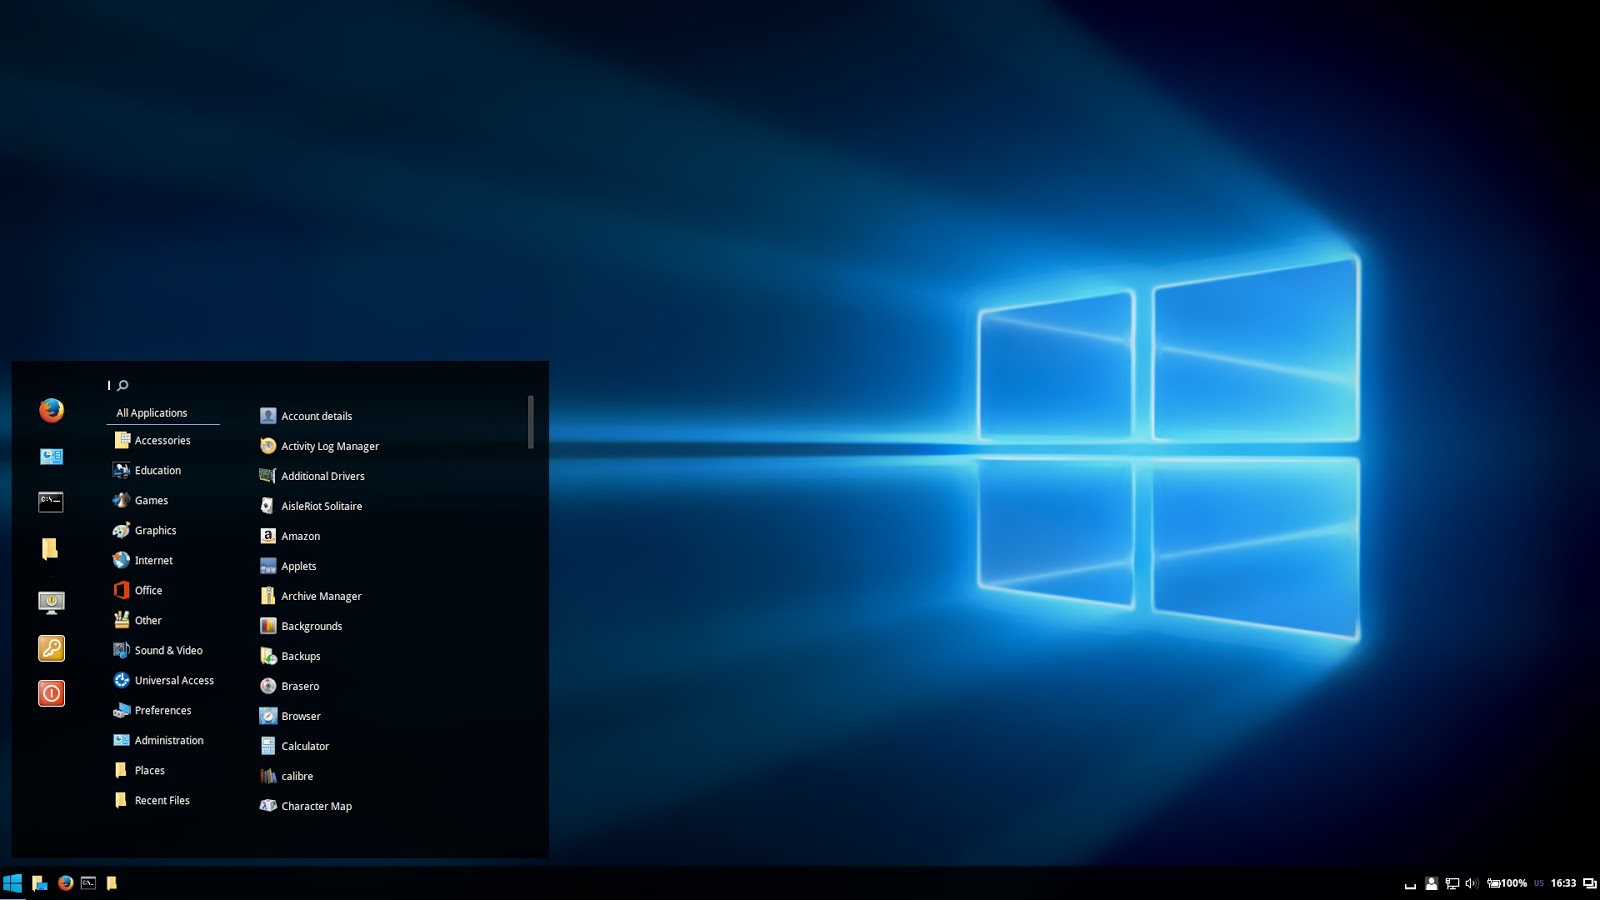 Do You Like Windows 10 Look But Love Linux Here Are Windows 10 Gtk Themes For You Noobslab Eye On Digital World